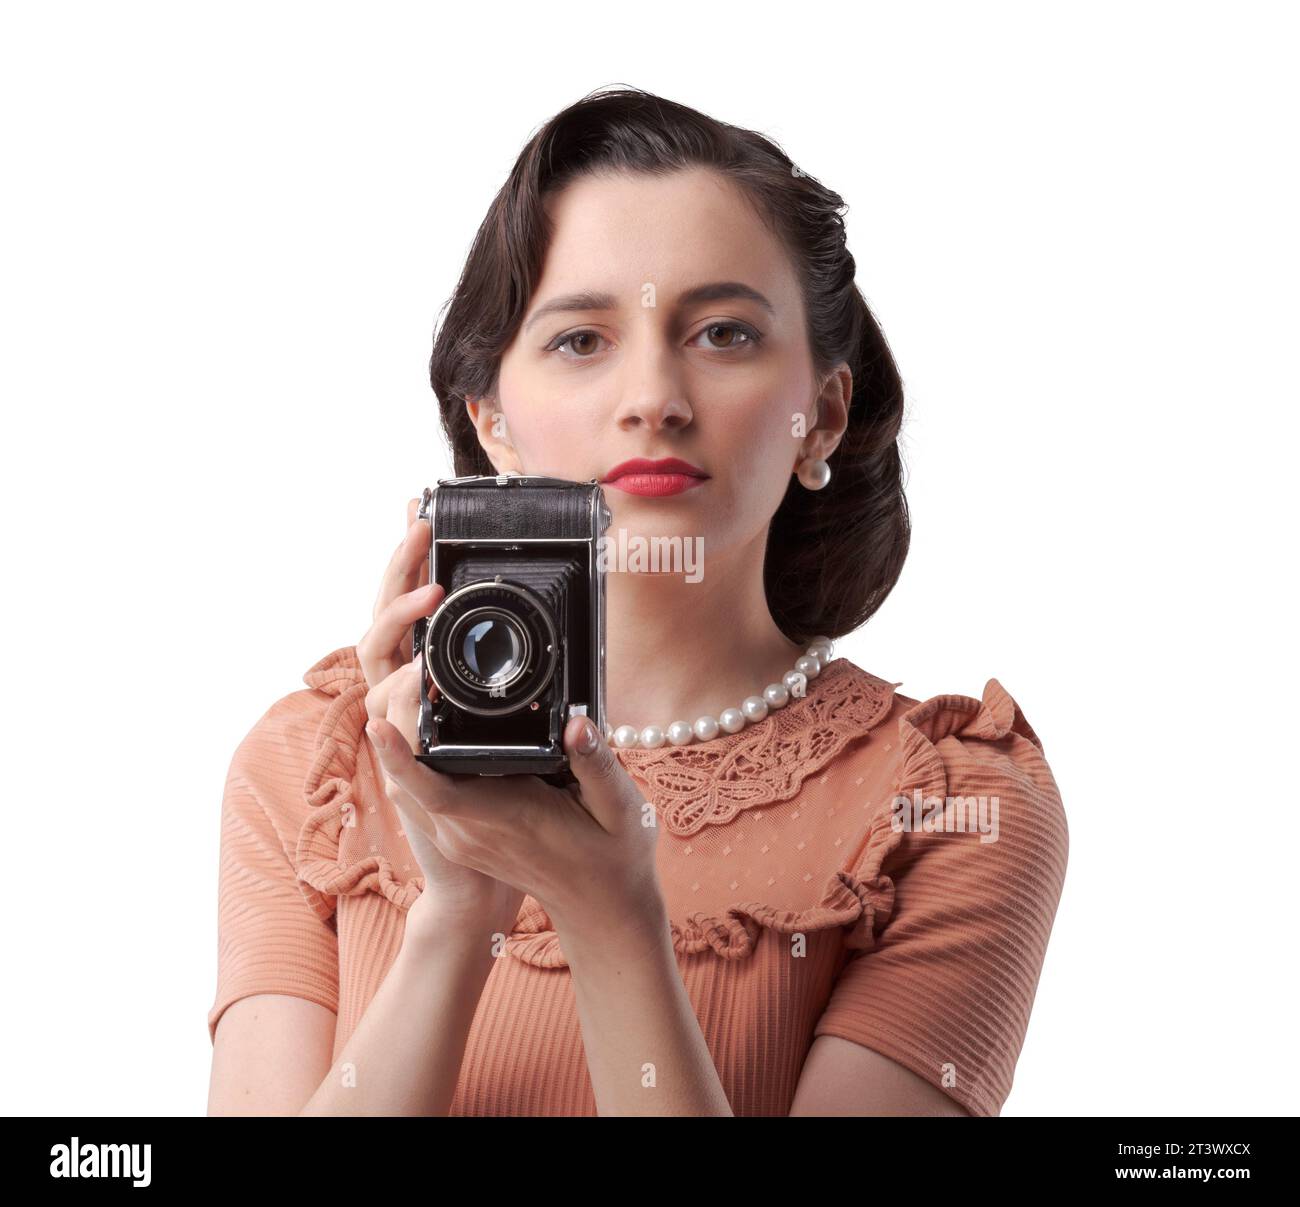 Beautiful elegant woman taking pictures with a vintage camera Stock Photo